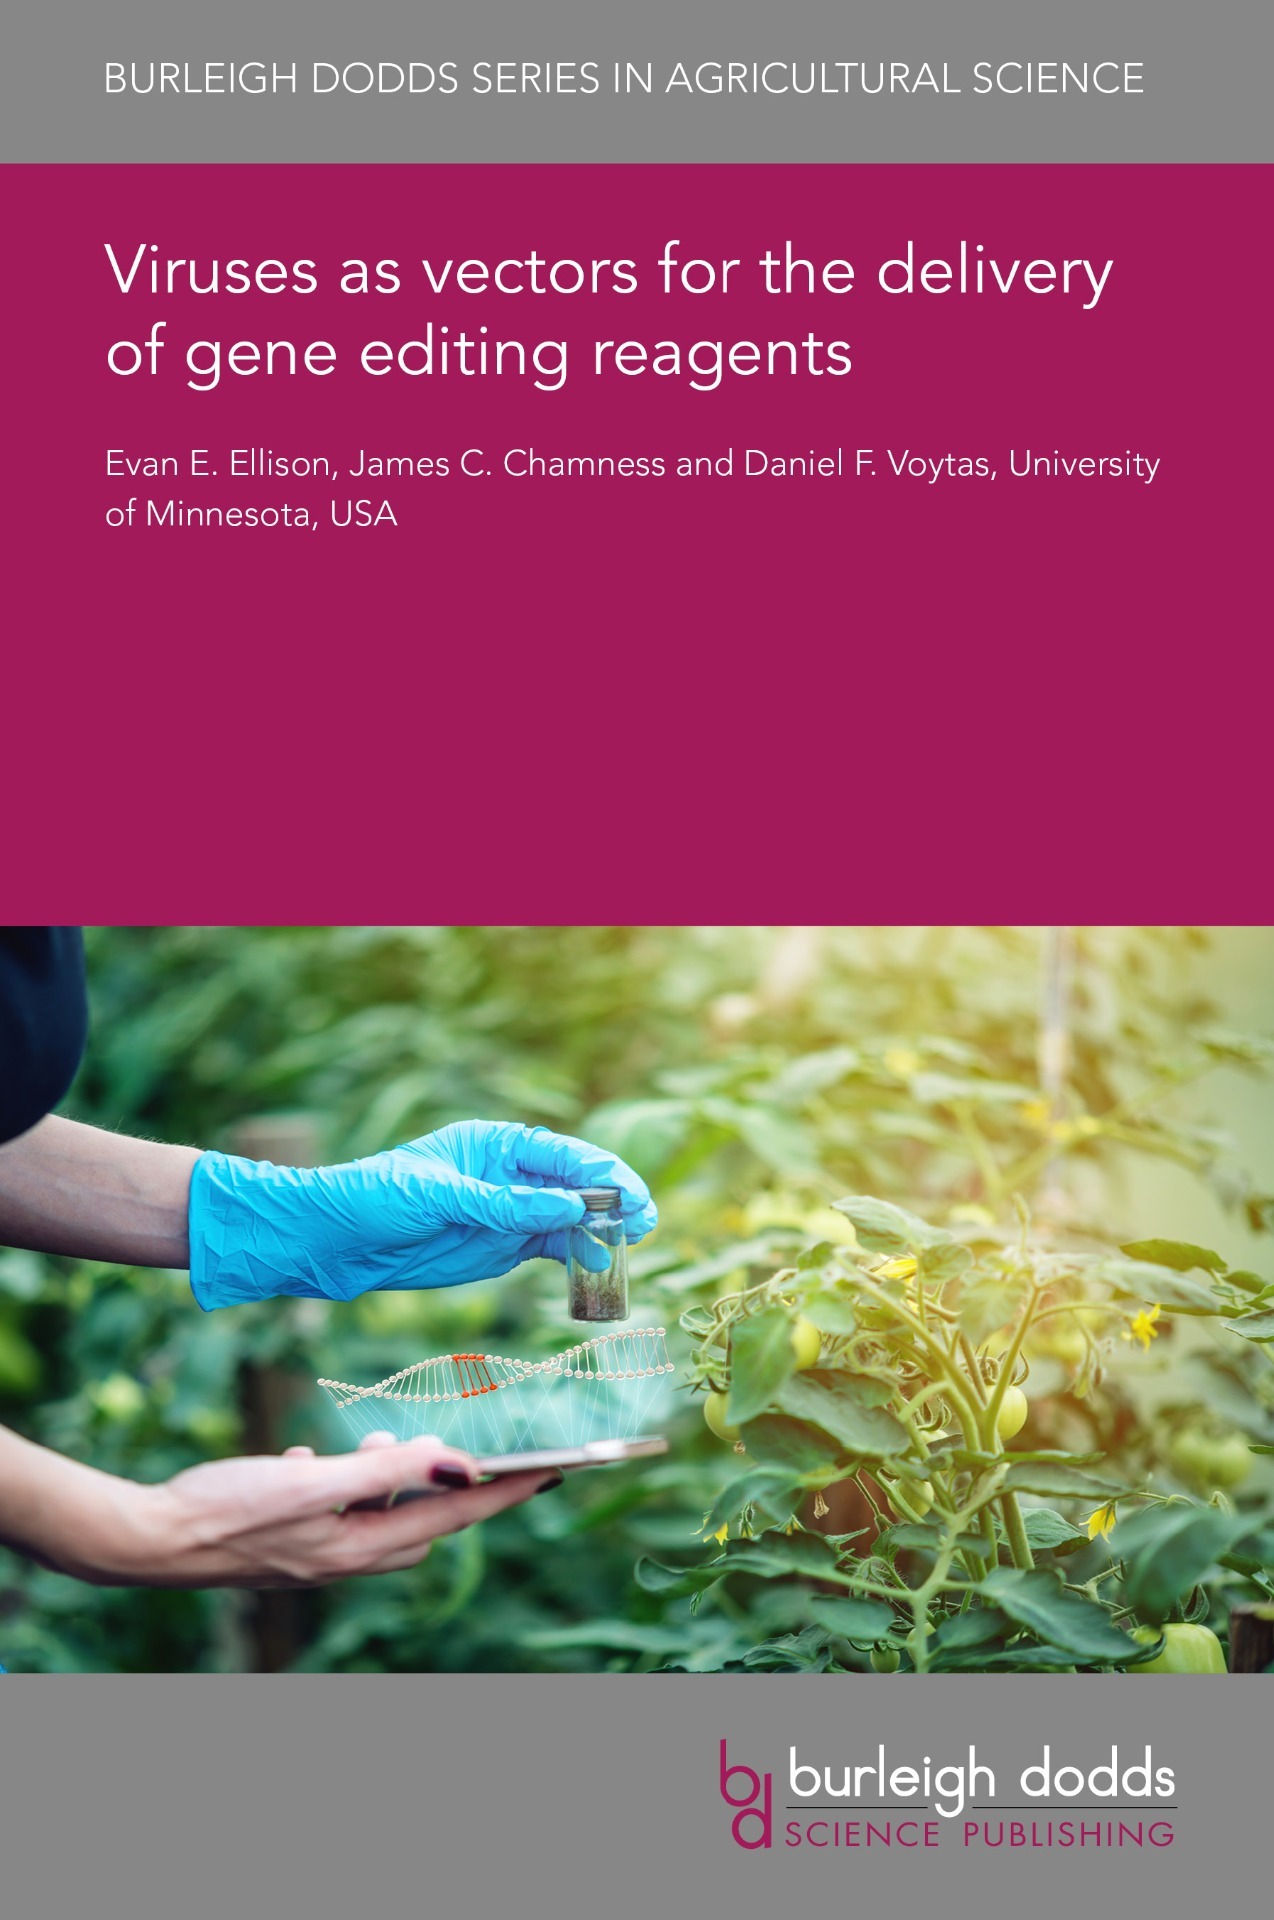 Viruses as vectors for the delivery of gene editing reagents